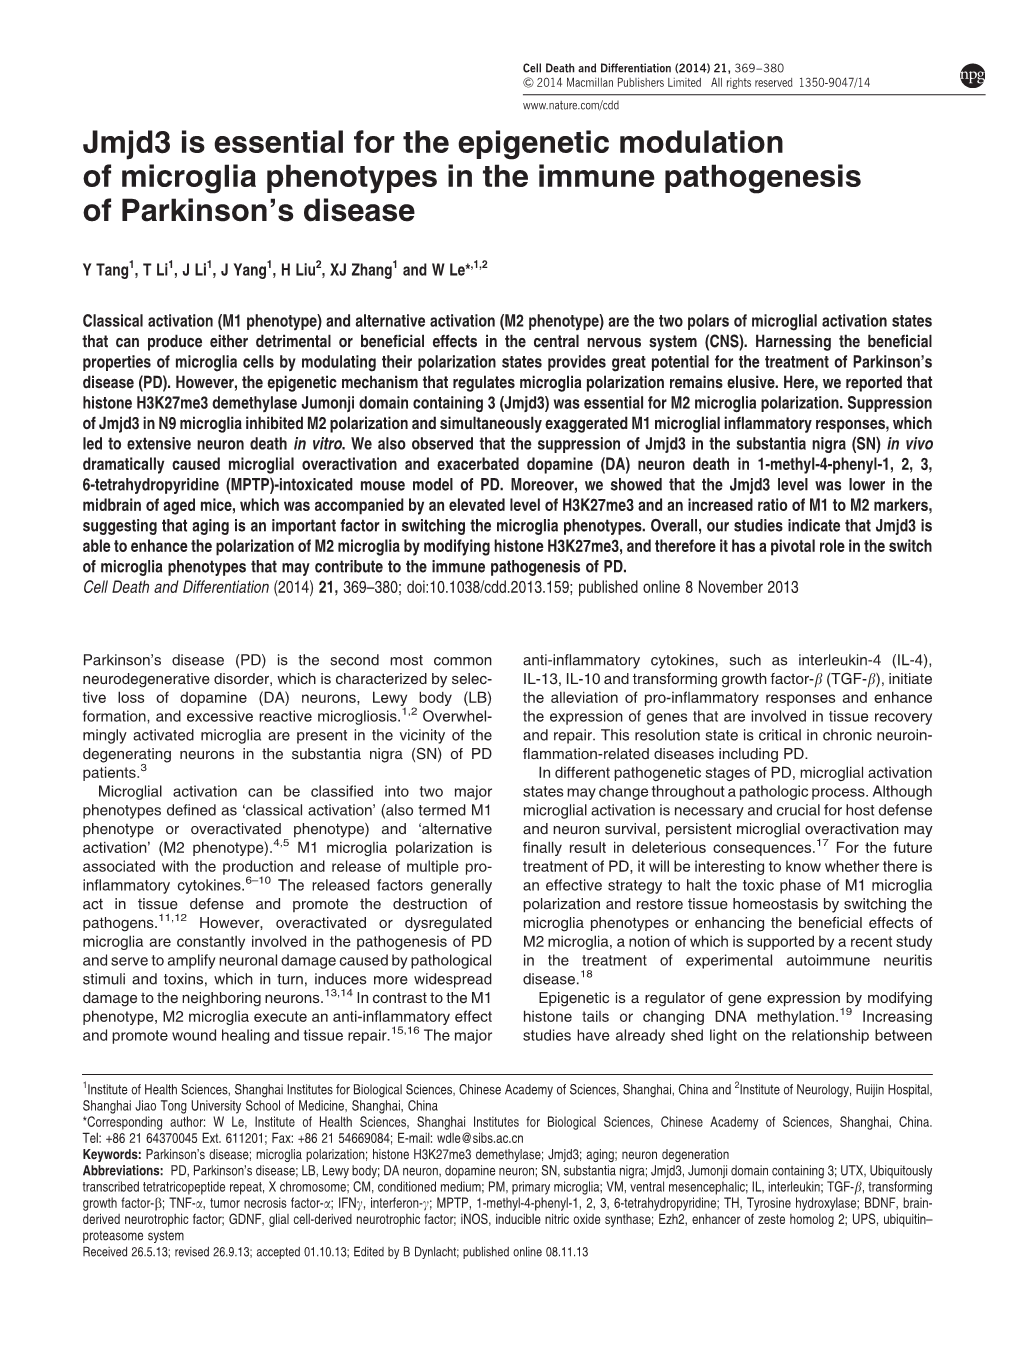 Jmjd3 Is Essential for the Epigenetic Modulation of Microglia Phenotypes in the Immune Pathogenesis of Parkinson’S Disease